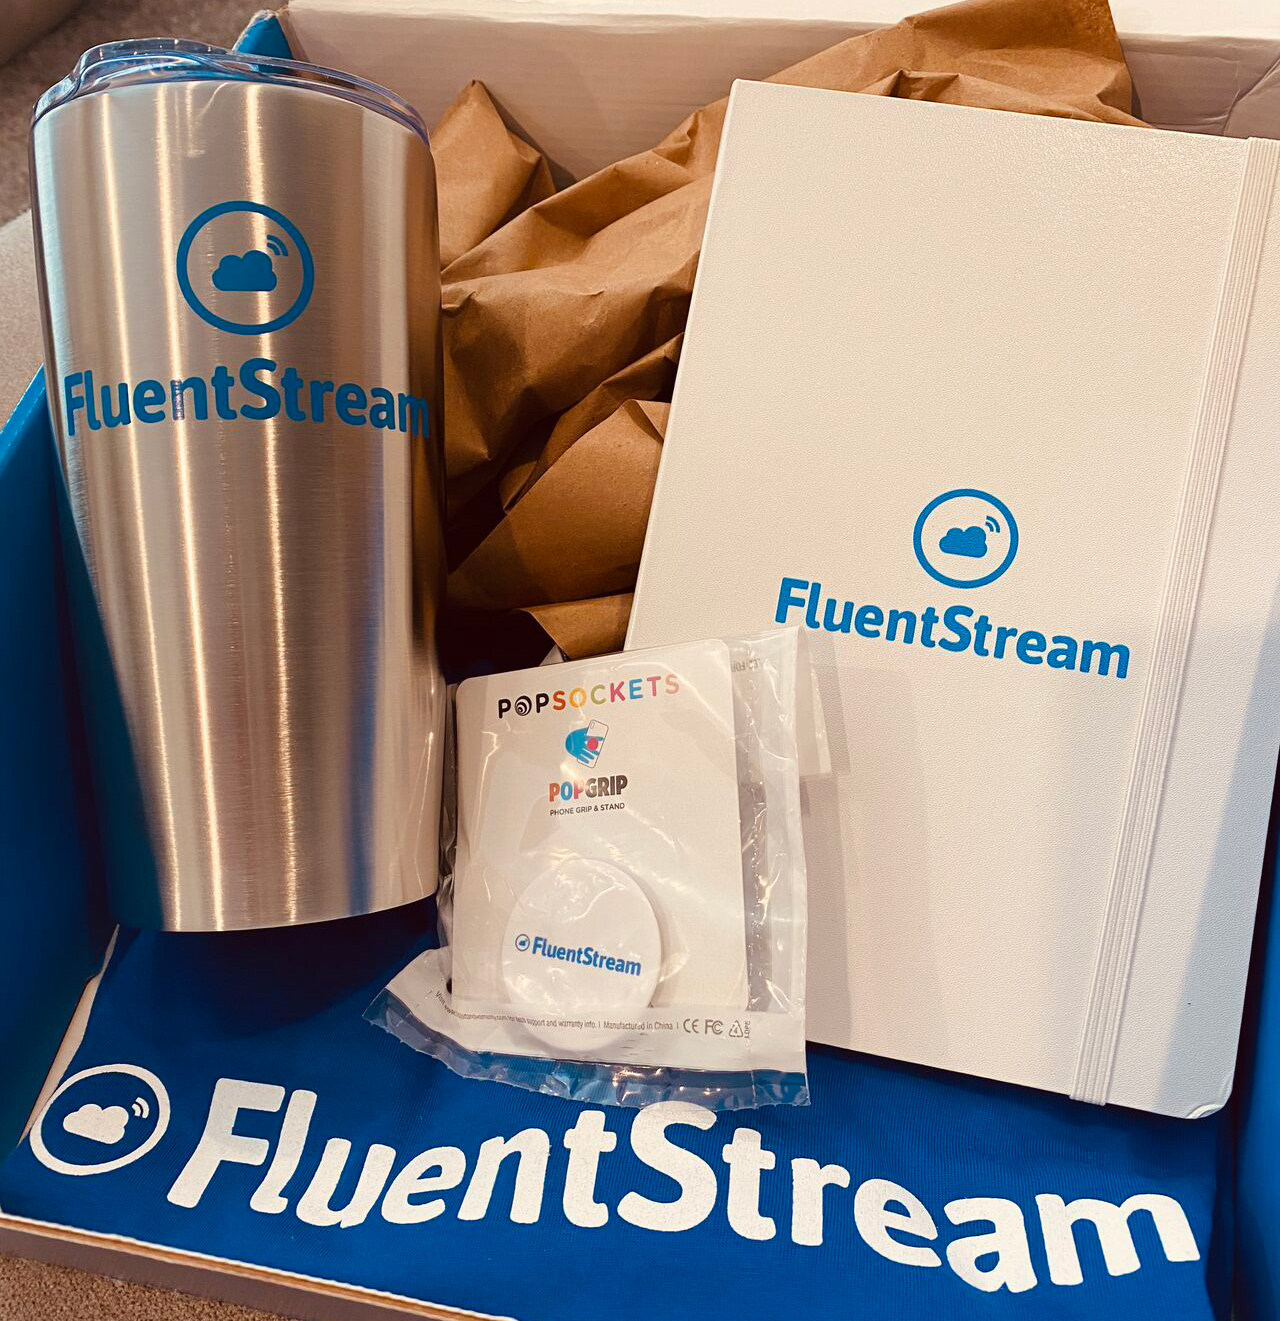 Tumbler, journal, pop socket and t-shirt with the FluentStream logo on them